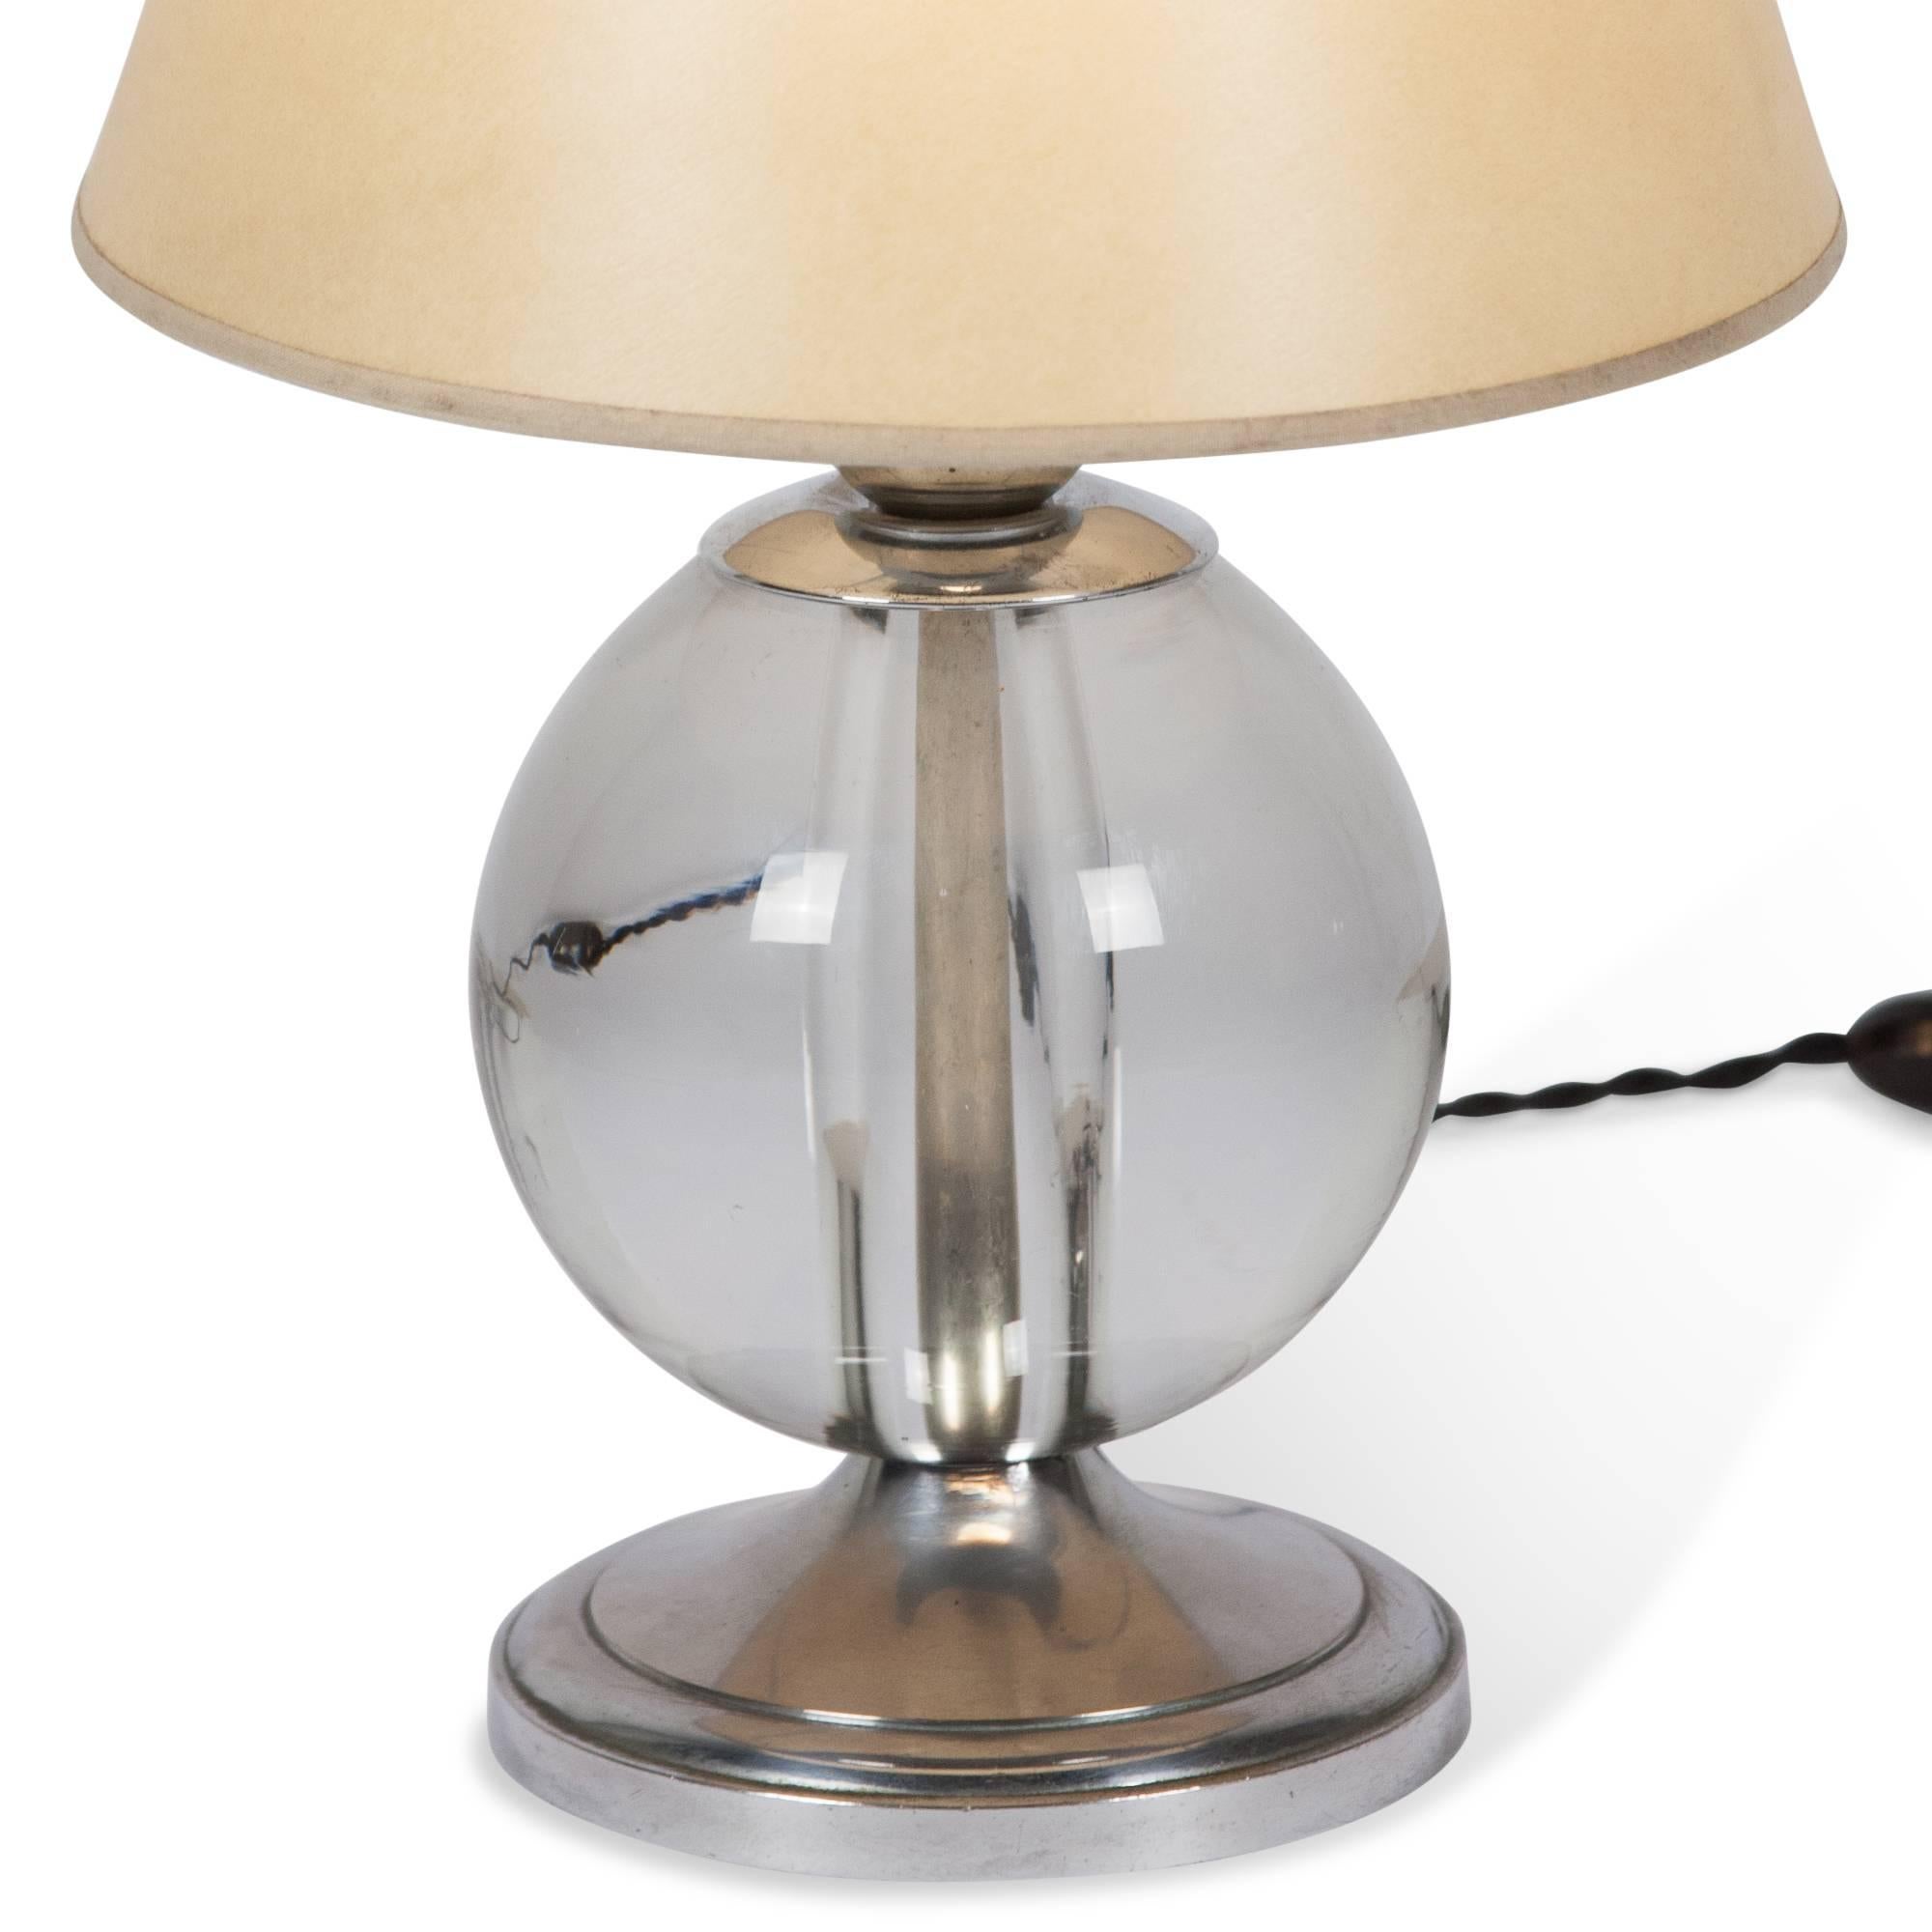 Mid-20th Century Jacques Adnet Attributed Crystal Lamp, French, 1930s For Sale